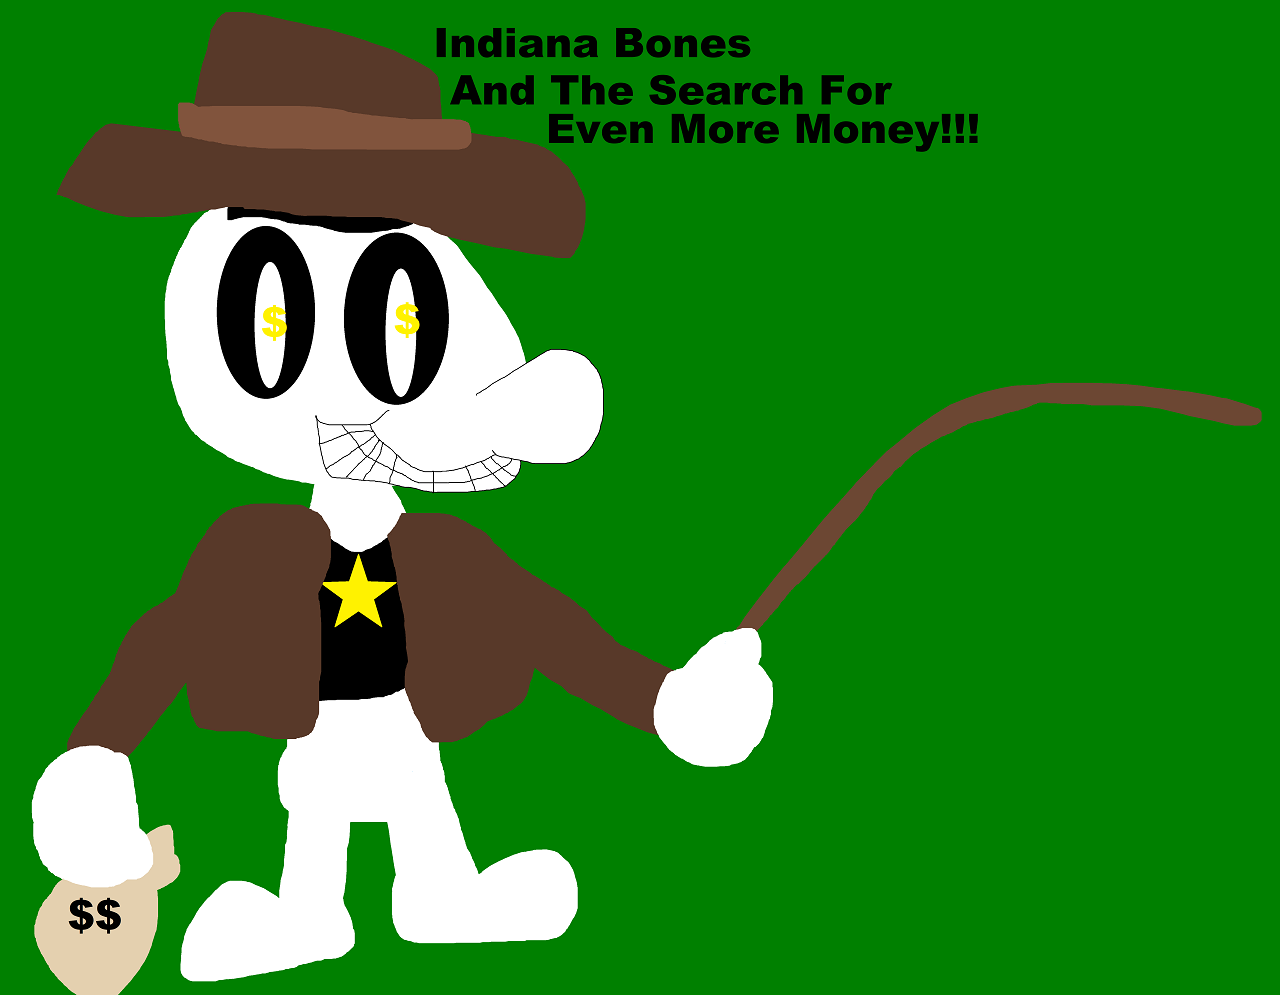 Indiana Bones And The Search For Even More Money^^ by Falconlobo